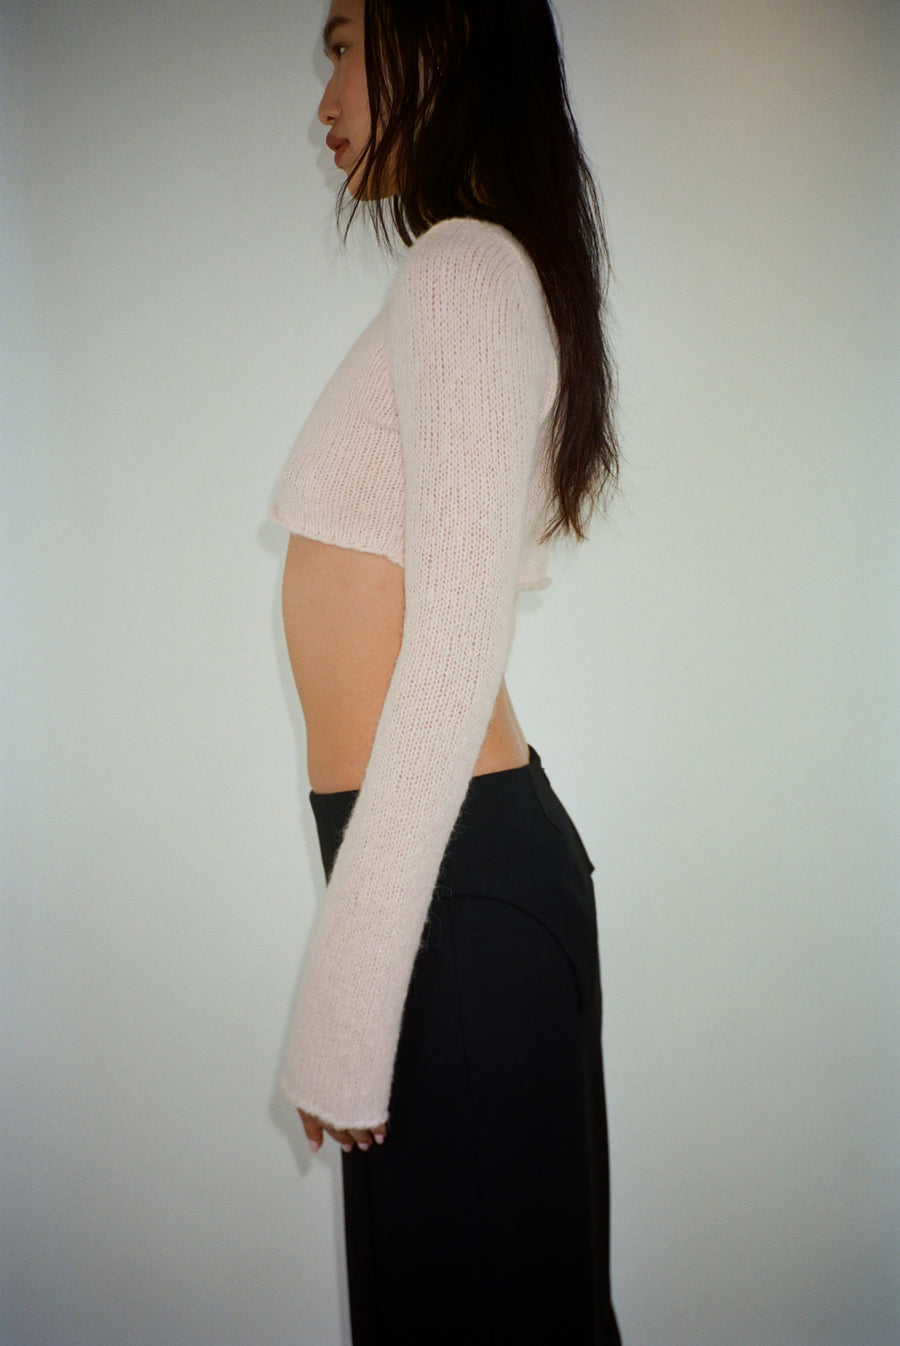 Cropped knit sweater in blush pink on model